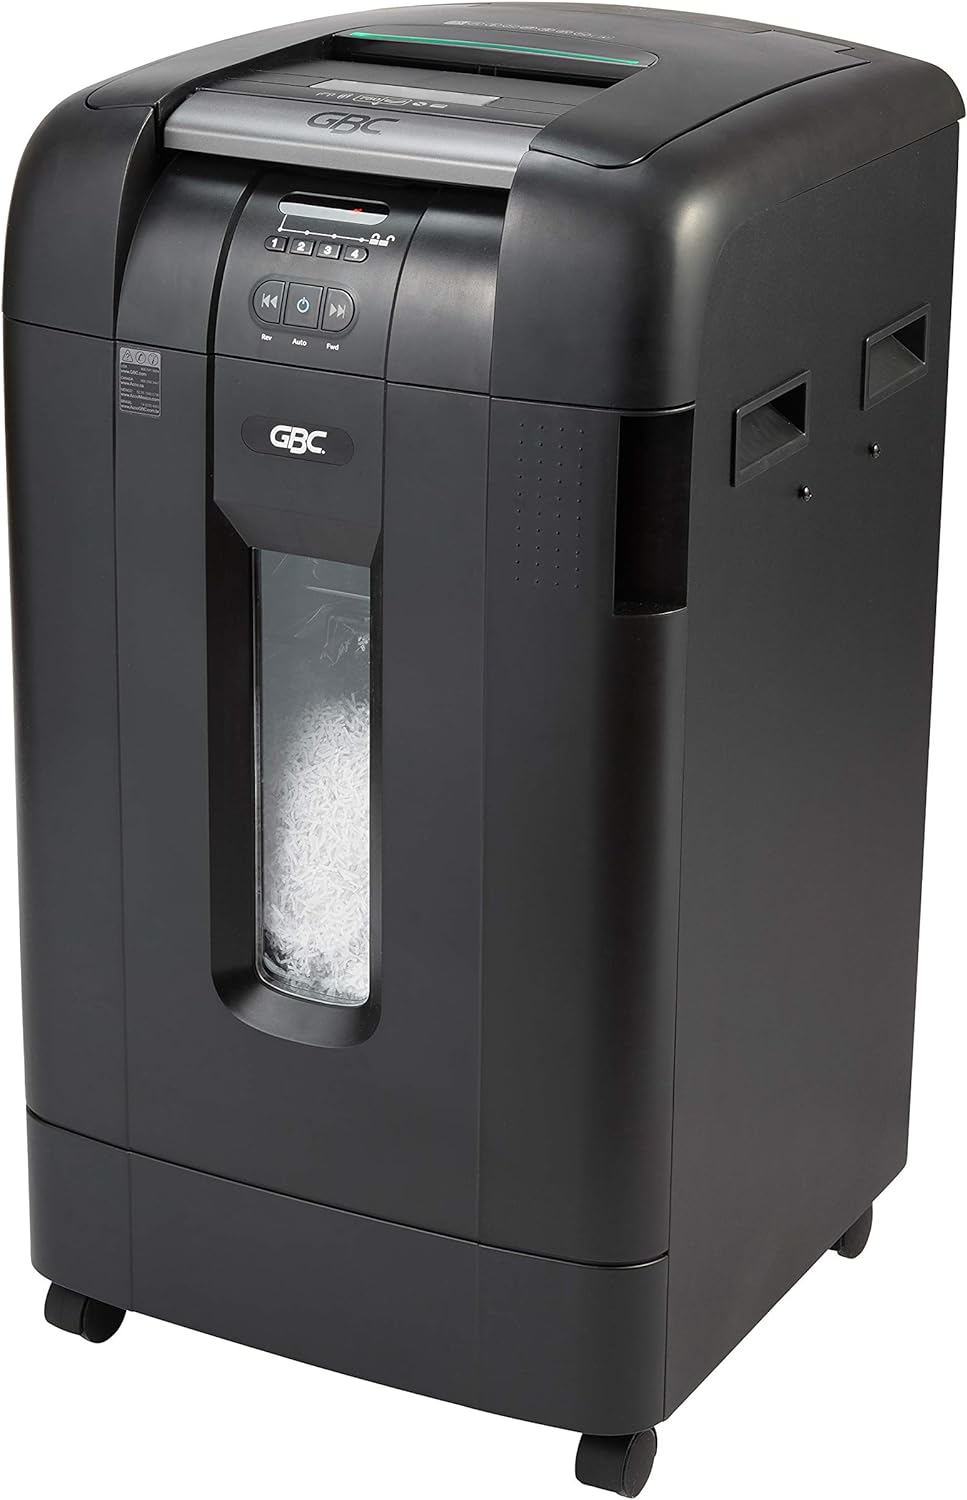 Image of Swingline Stack and Shred 750X Auto Feed Shredder